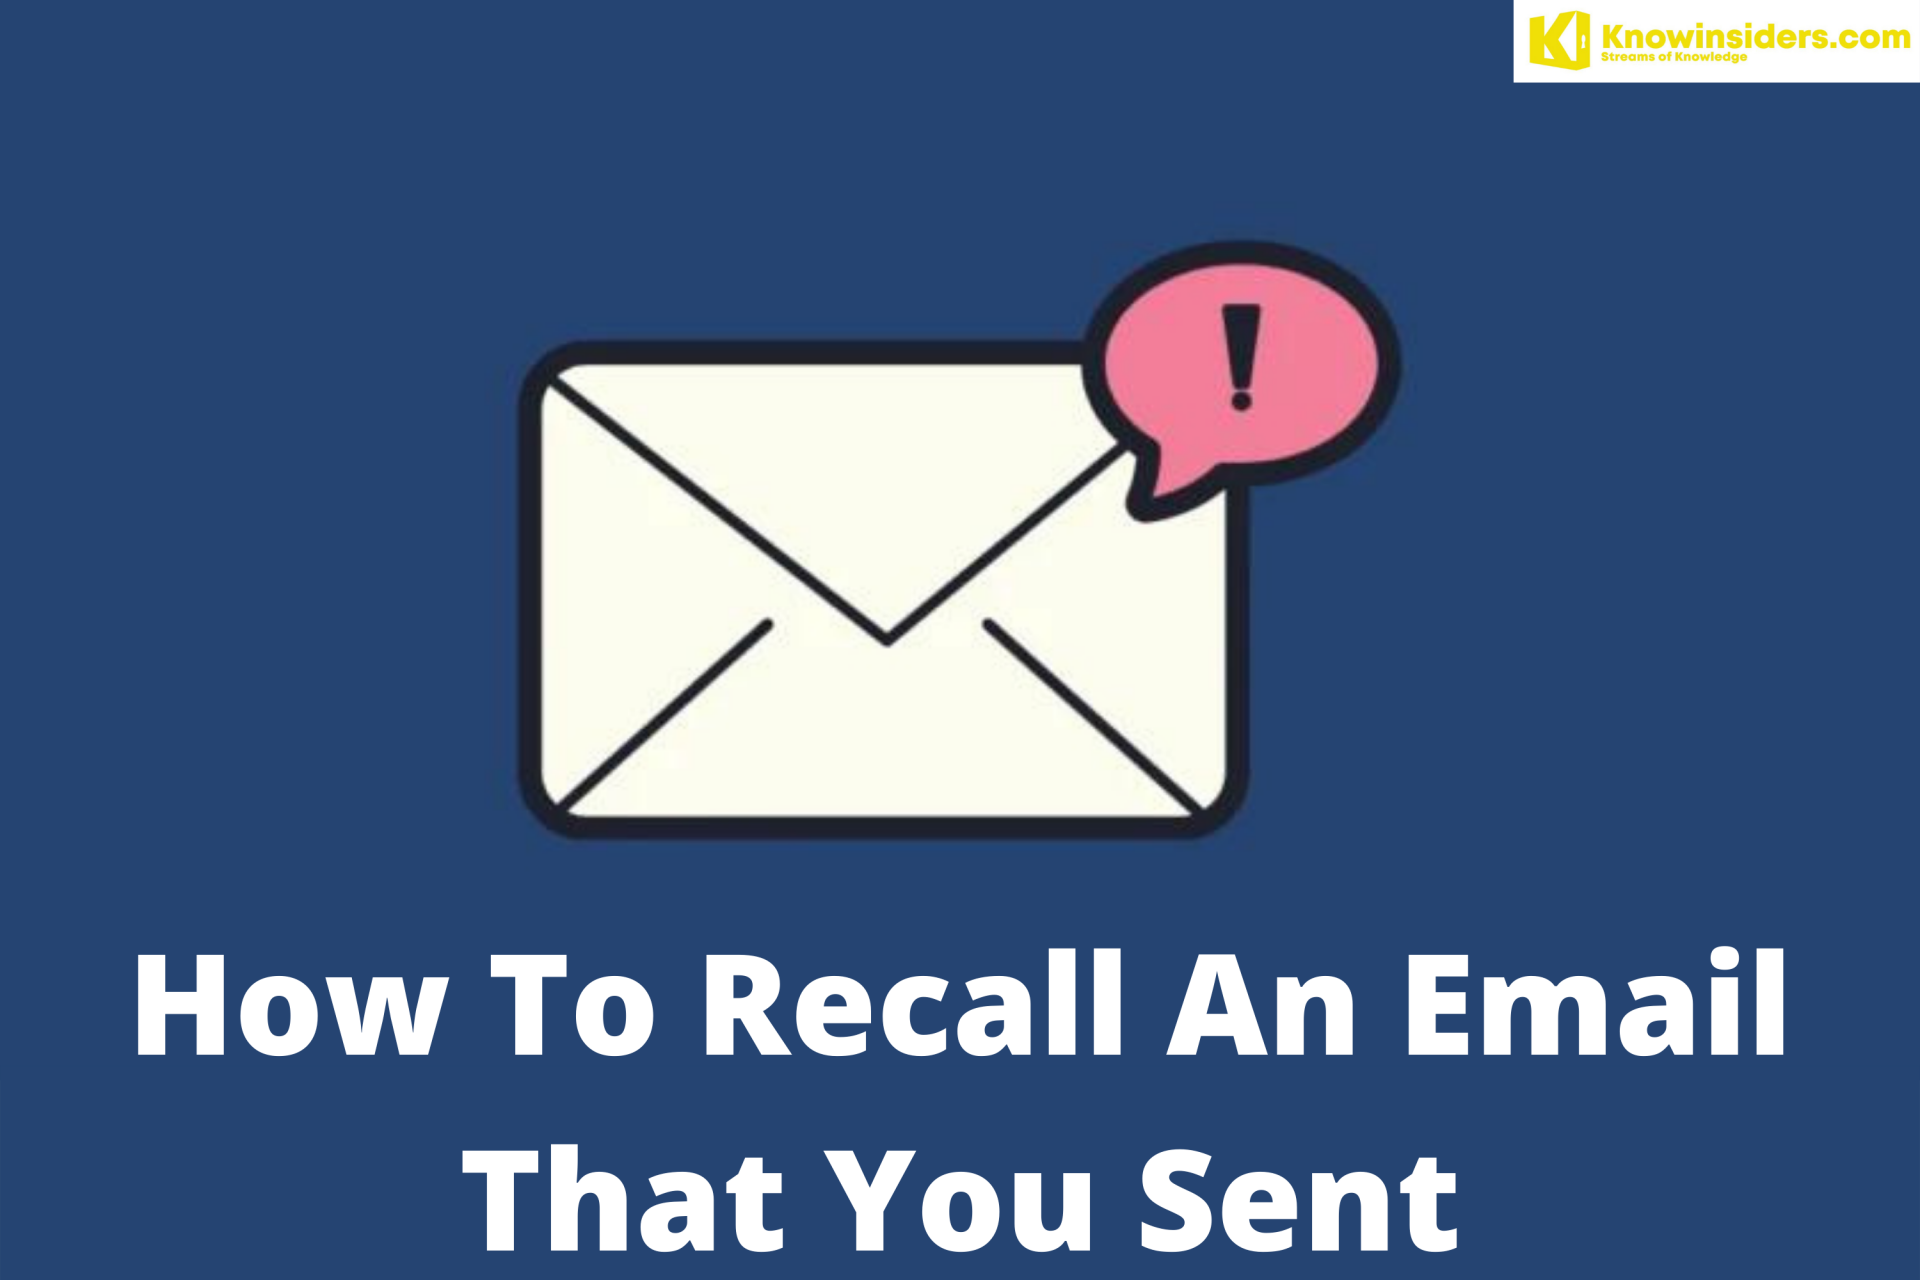 How To Recall An Email in Outlook with Undo Send & Virtru